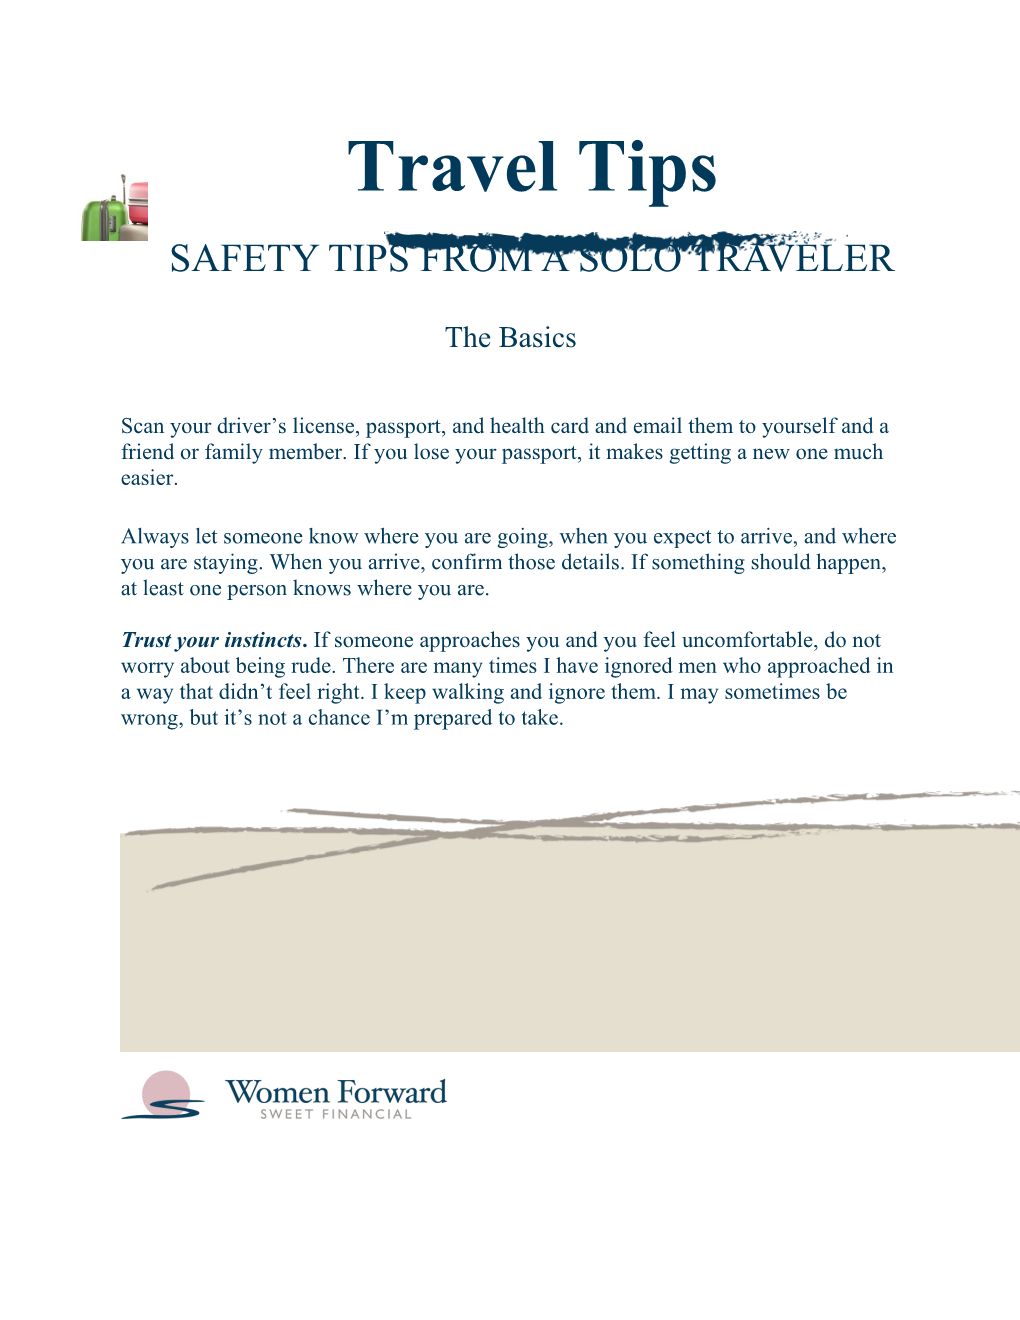 Safety Tips from a Solo Traveler